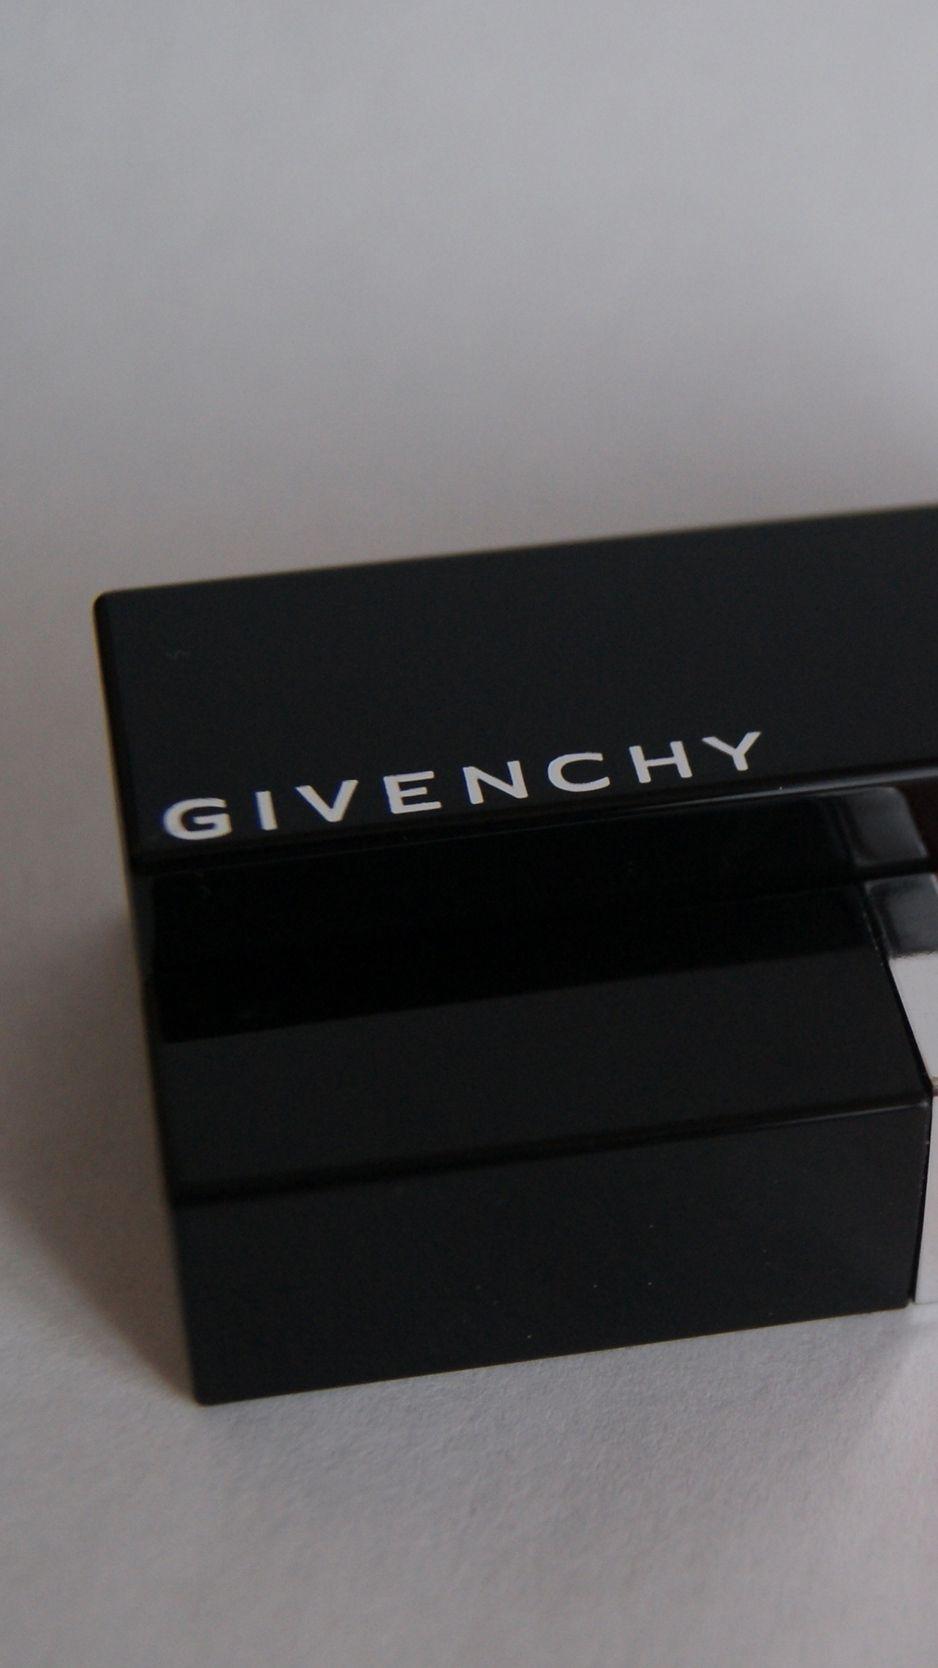 Givenchy iPhone Wallpaper , Wallpaper Download, (38)